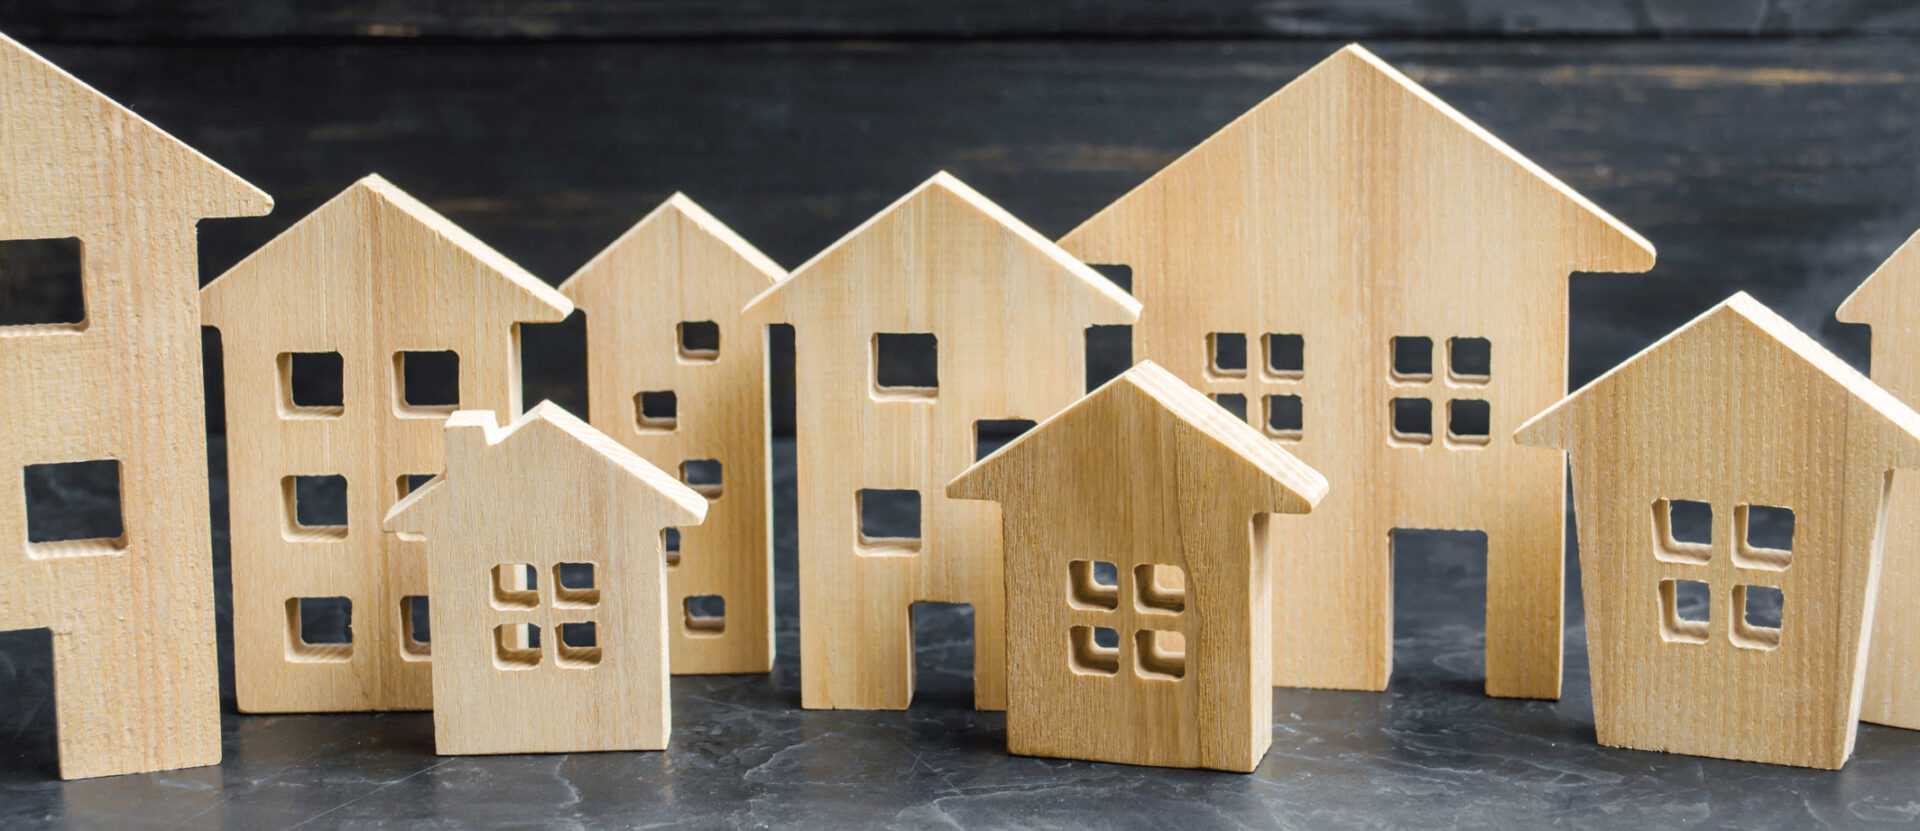 This image shows a row of wooden houses and buildings meant to represent a community of residences.